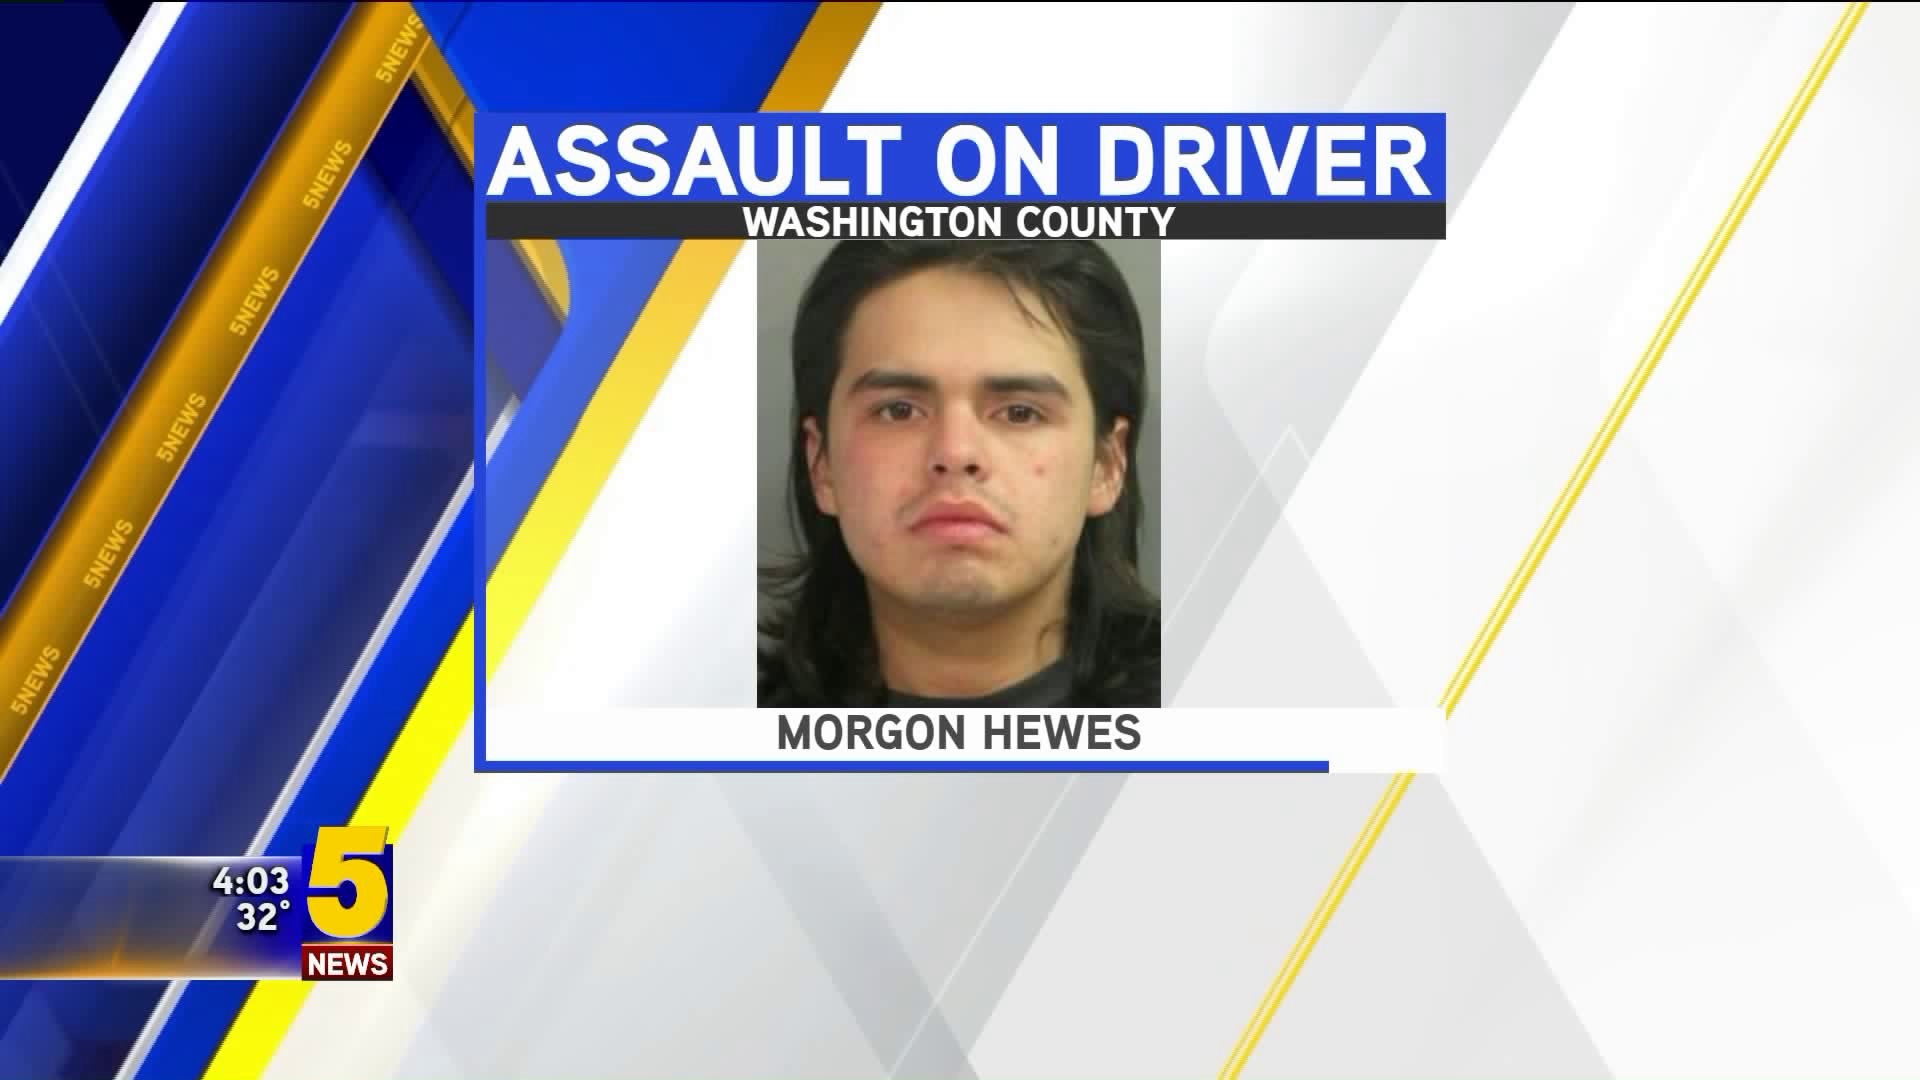 Man Arrested On Assault Charges After Victim Claims He Hit Her, Causing SUV To Crash Into Creek